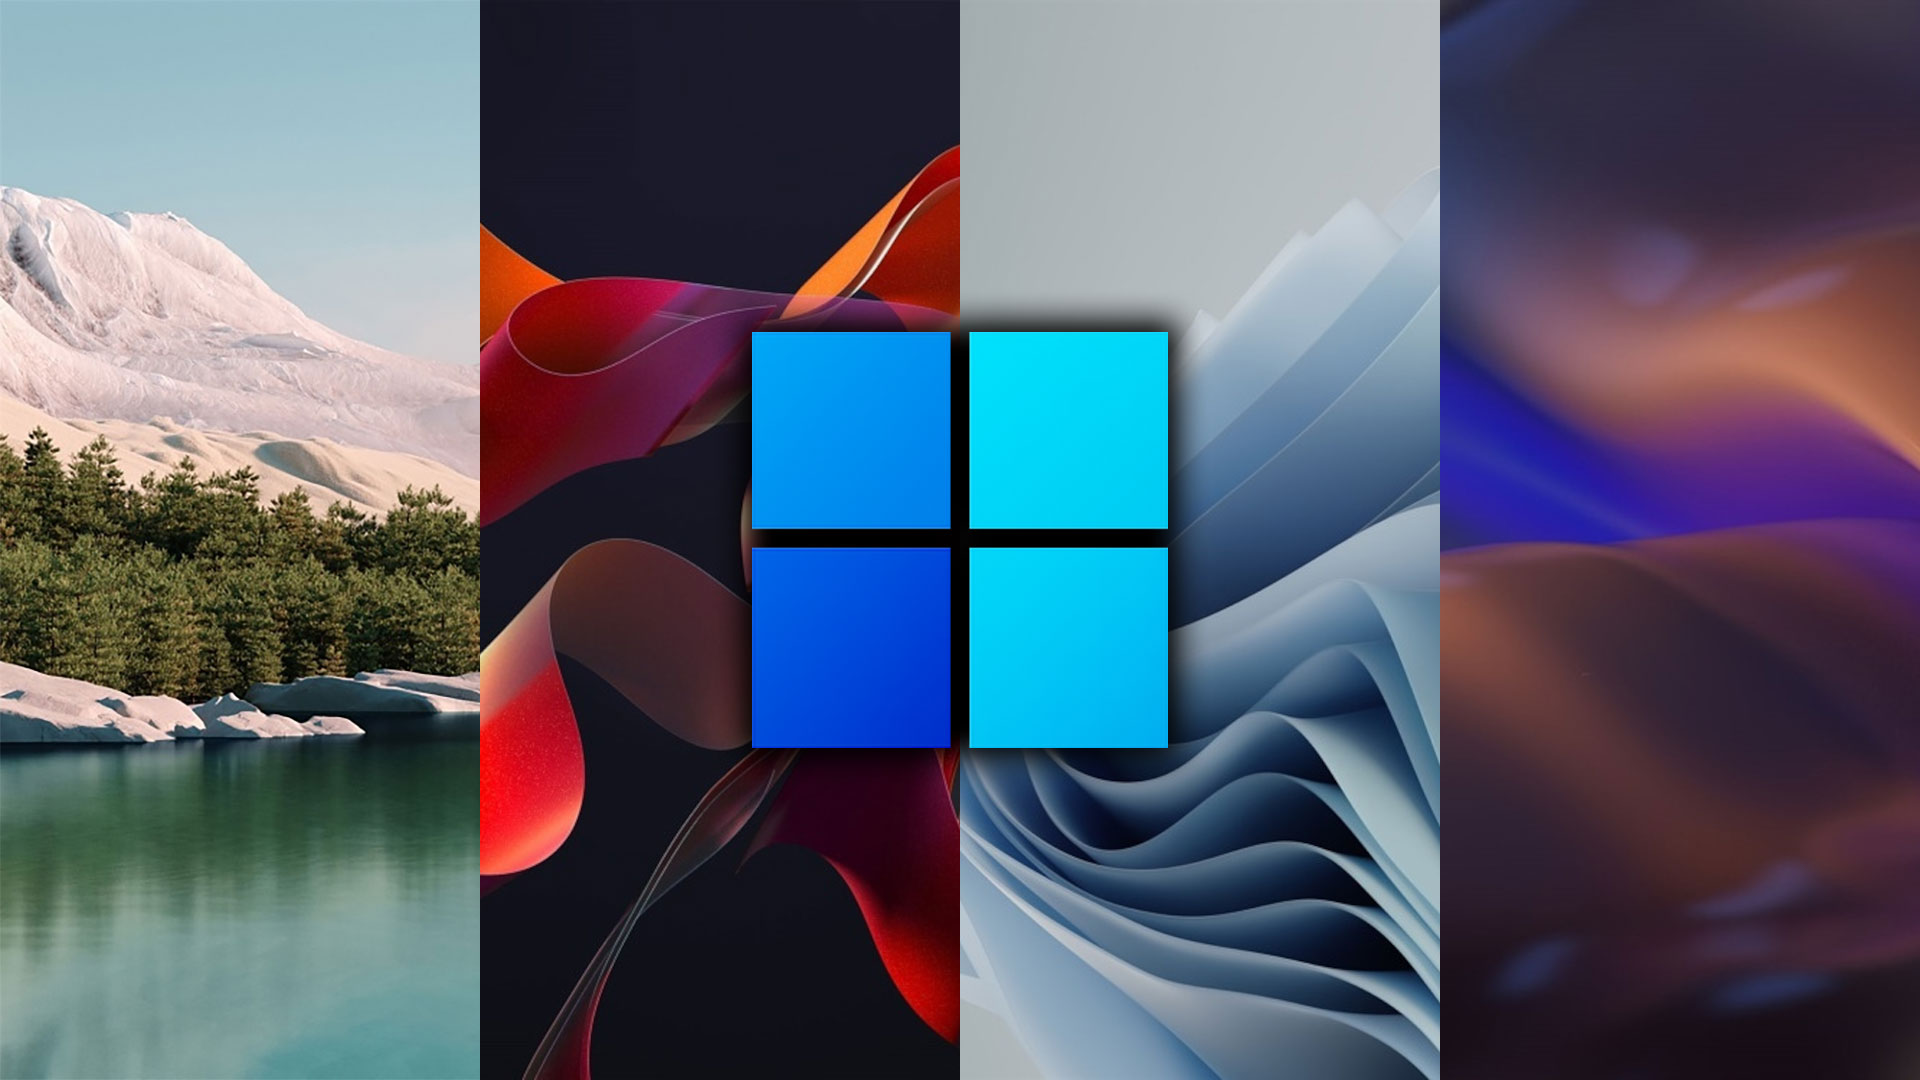 Windows 11 Wallpaper Hd - Windows 11 Wallpapers Have Also Made An Early